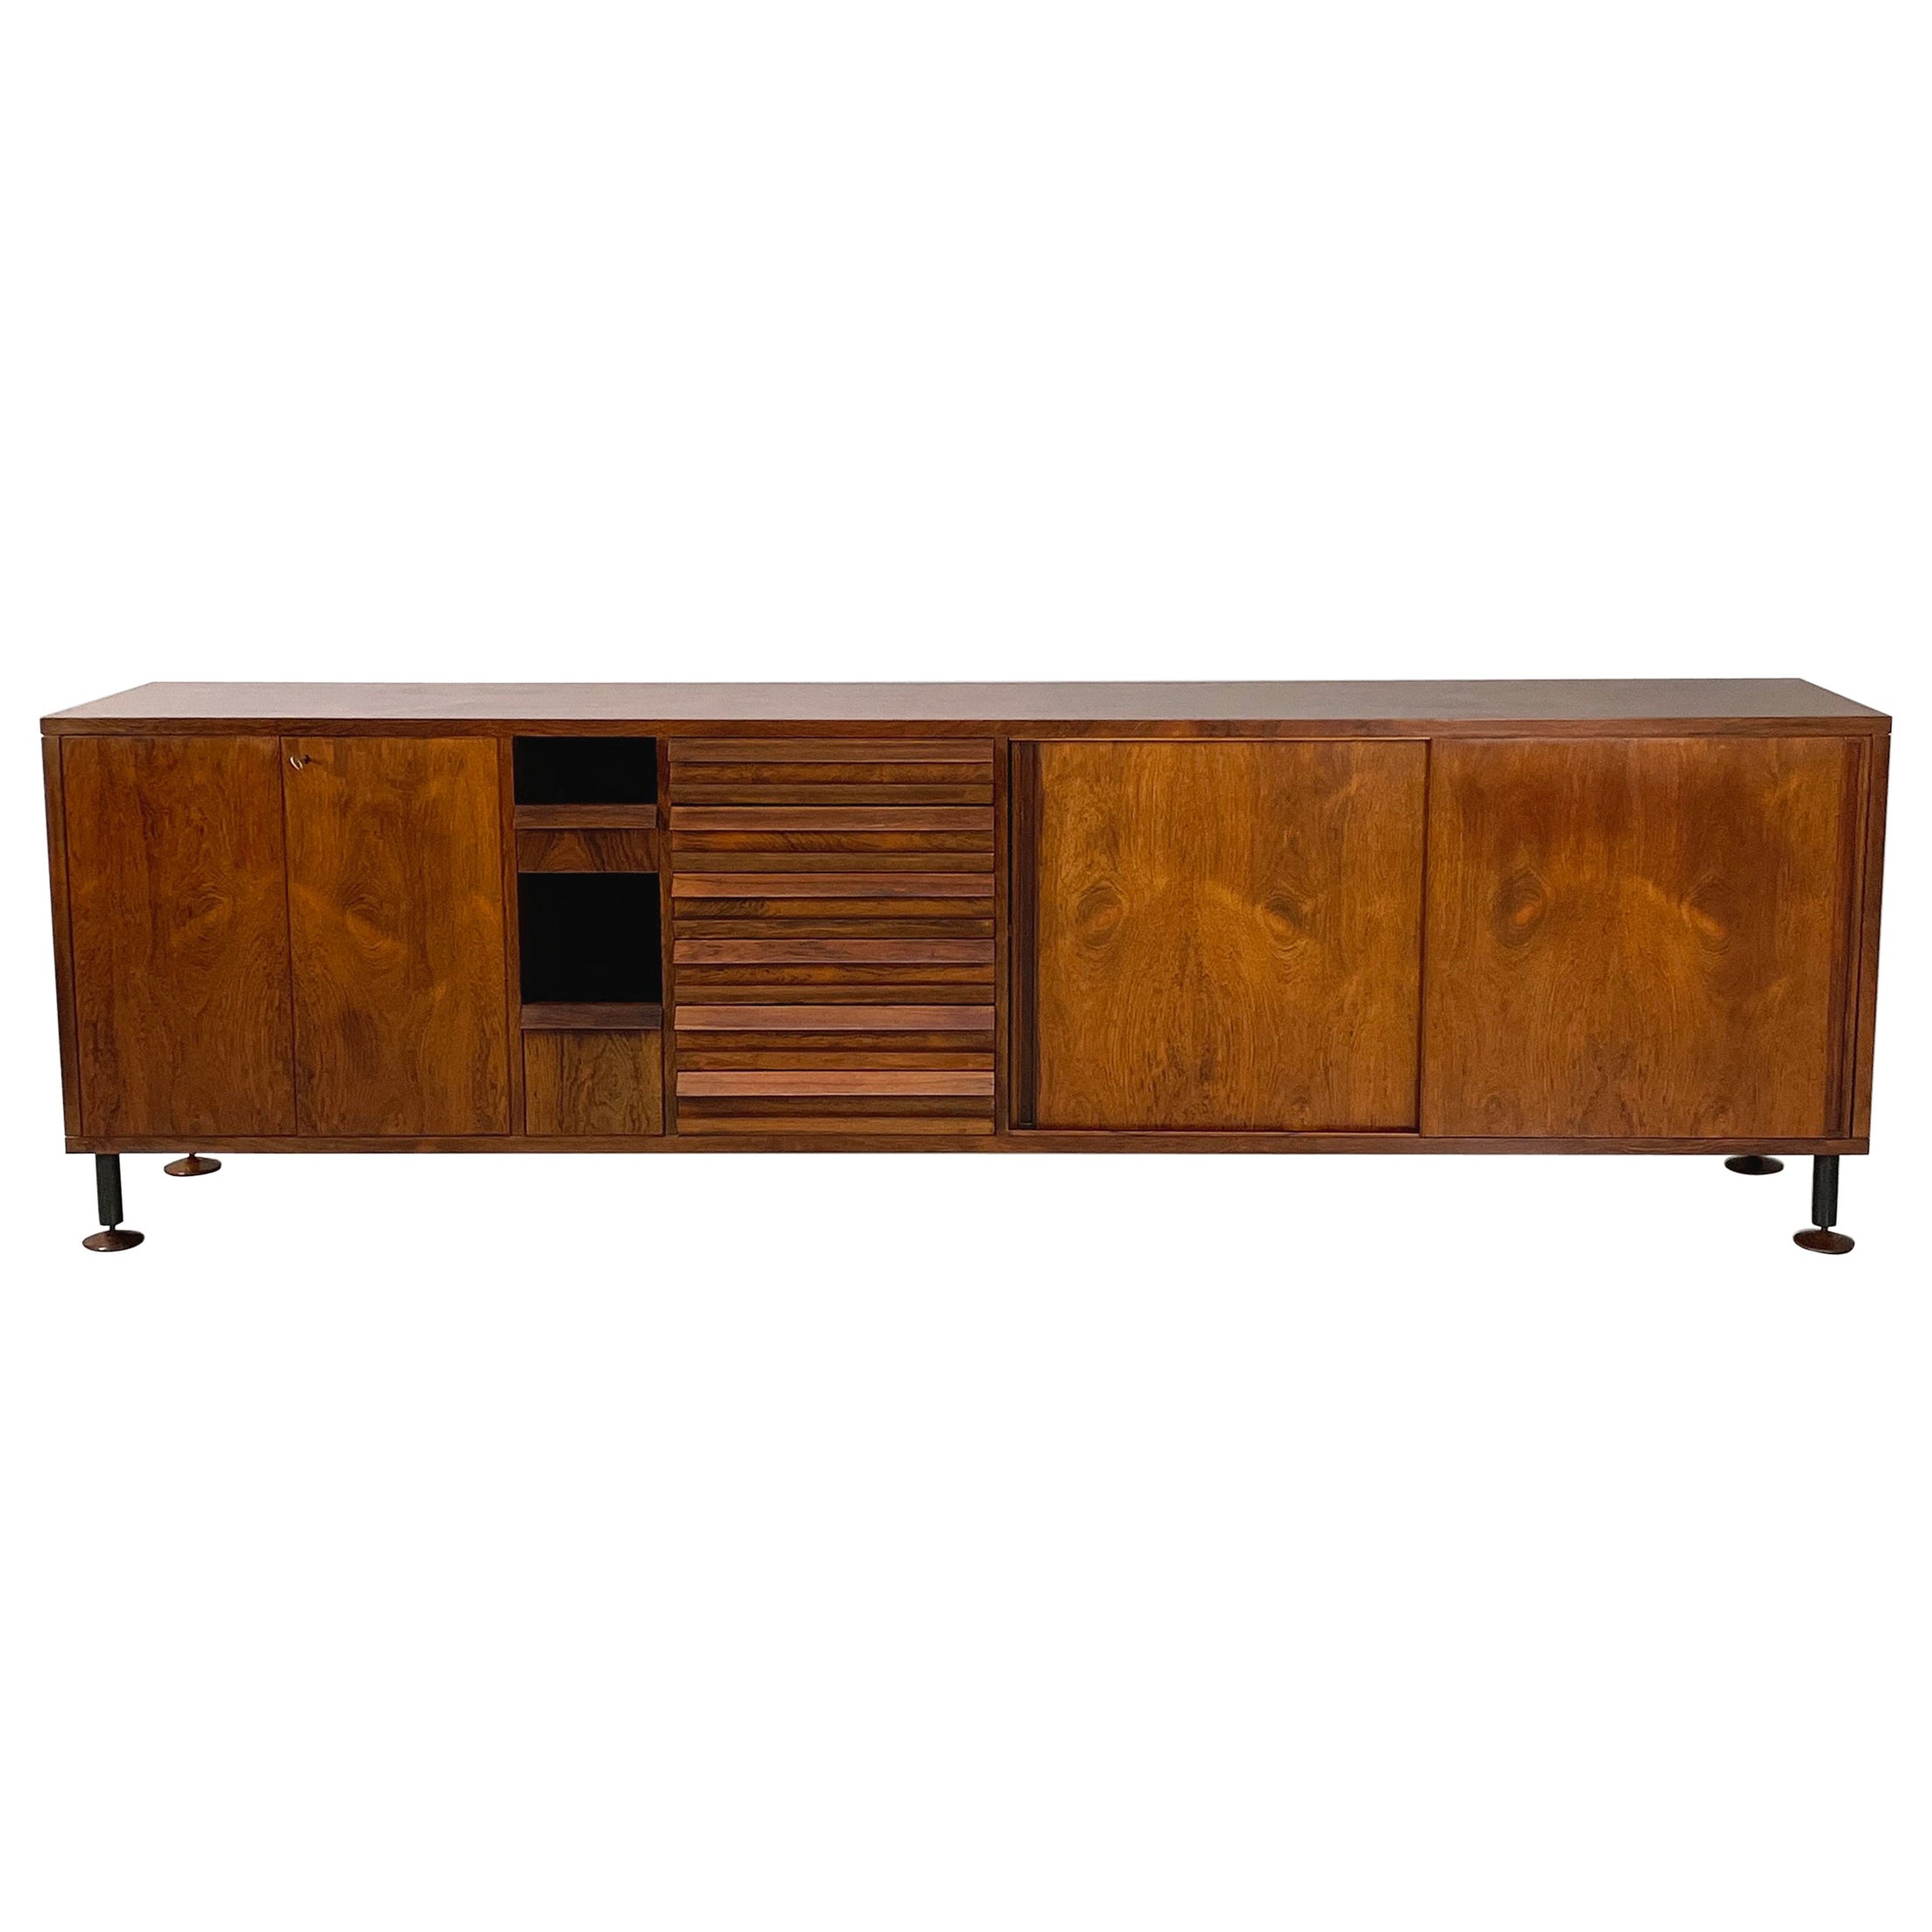 Italian mid-century modern Wooden sideboard with drawers and shelves, 1960s